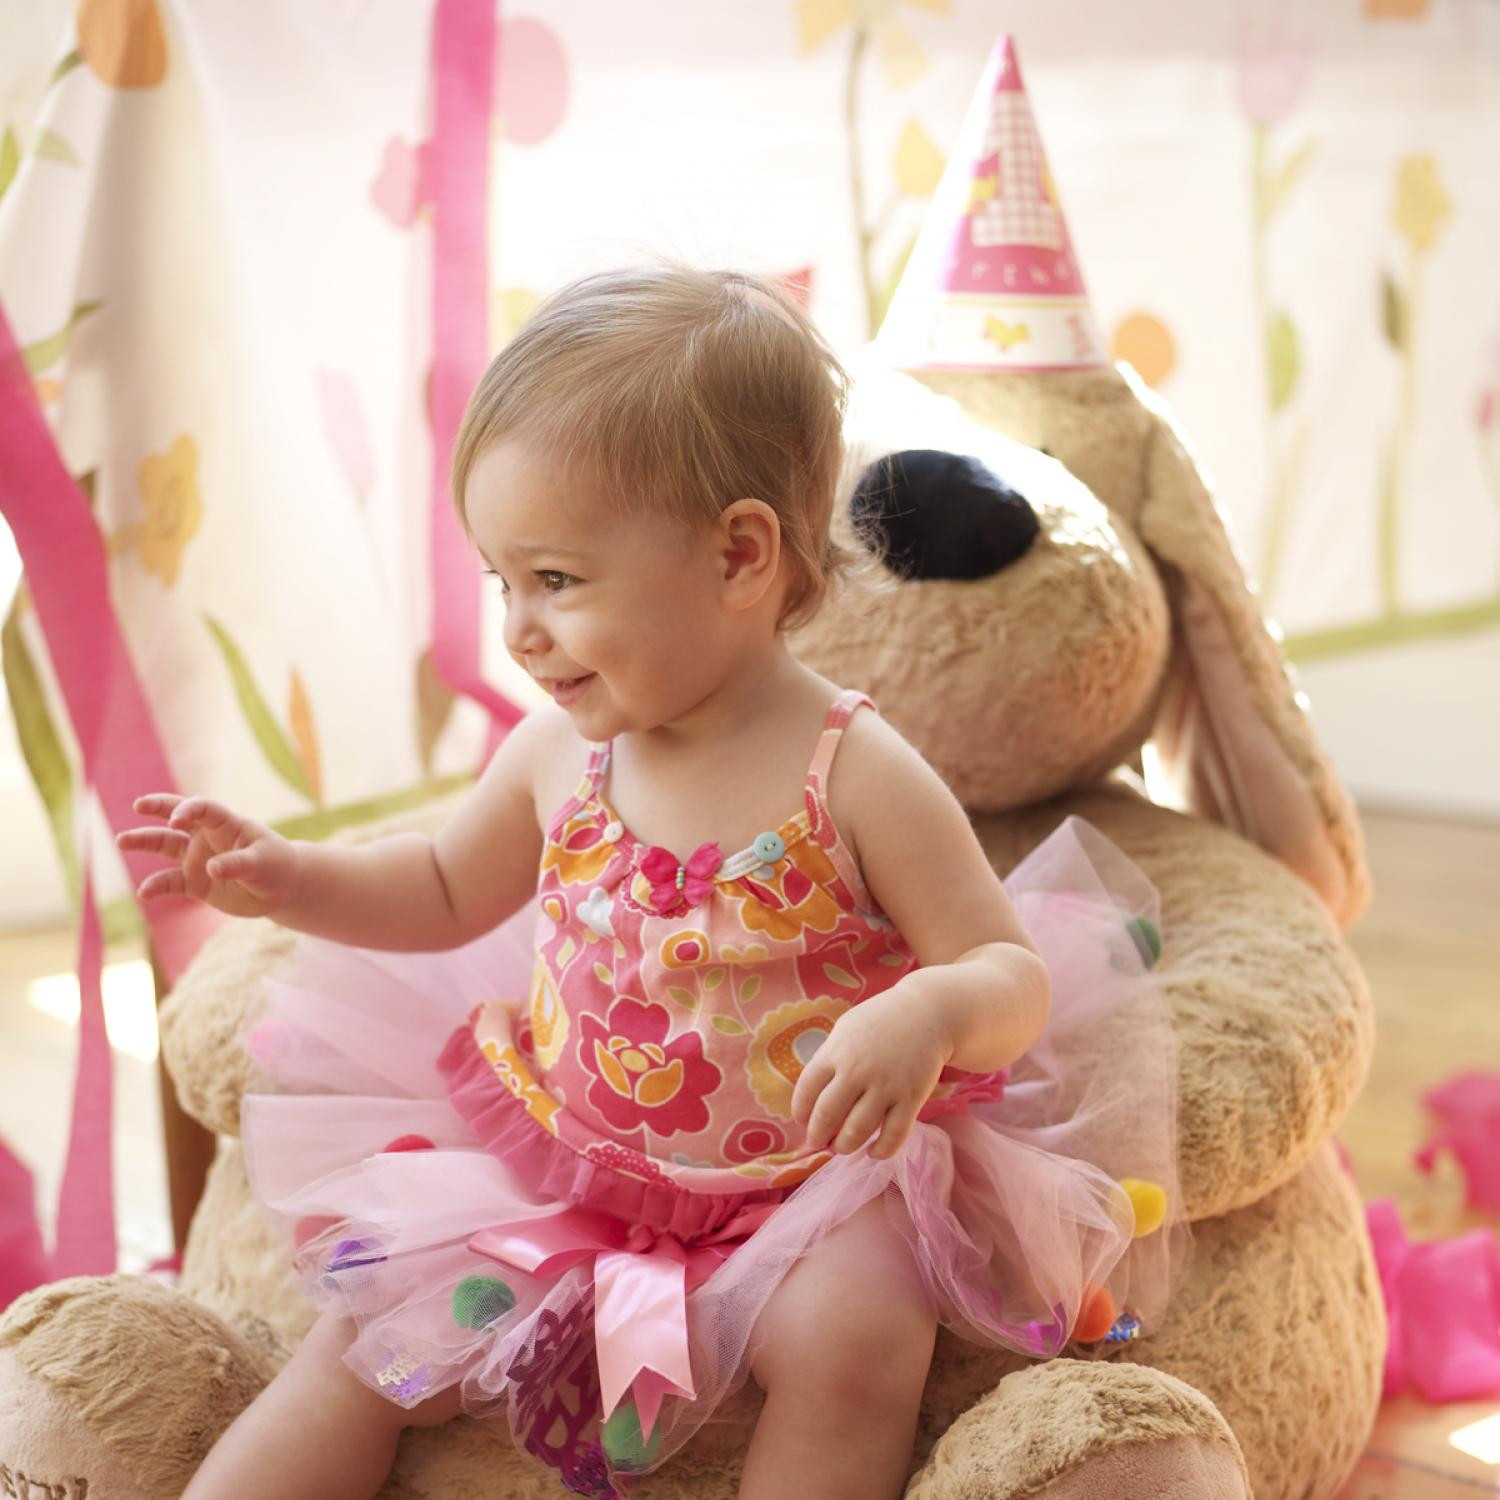 Party Theme For 1 Year Old Baby Girl
 25 Fun Baby s 1st Birthday Party Ideas